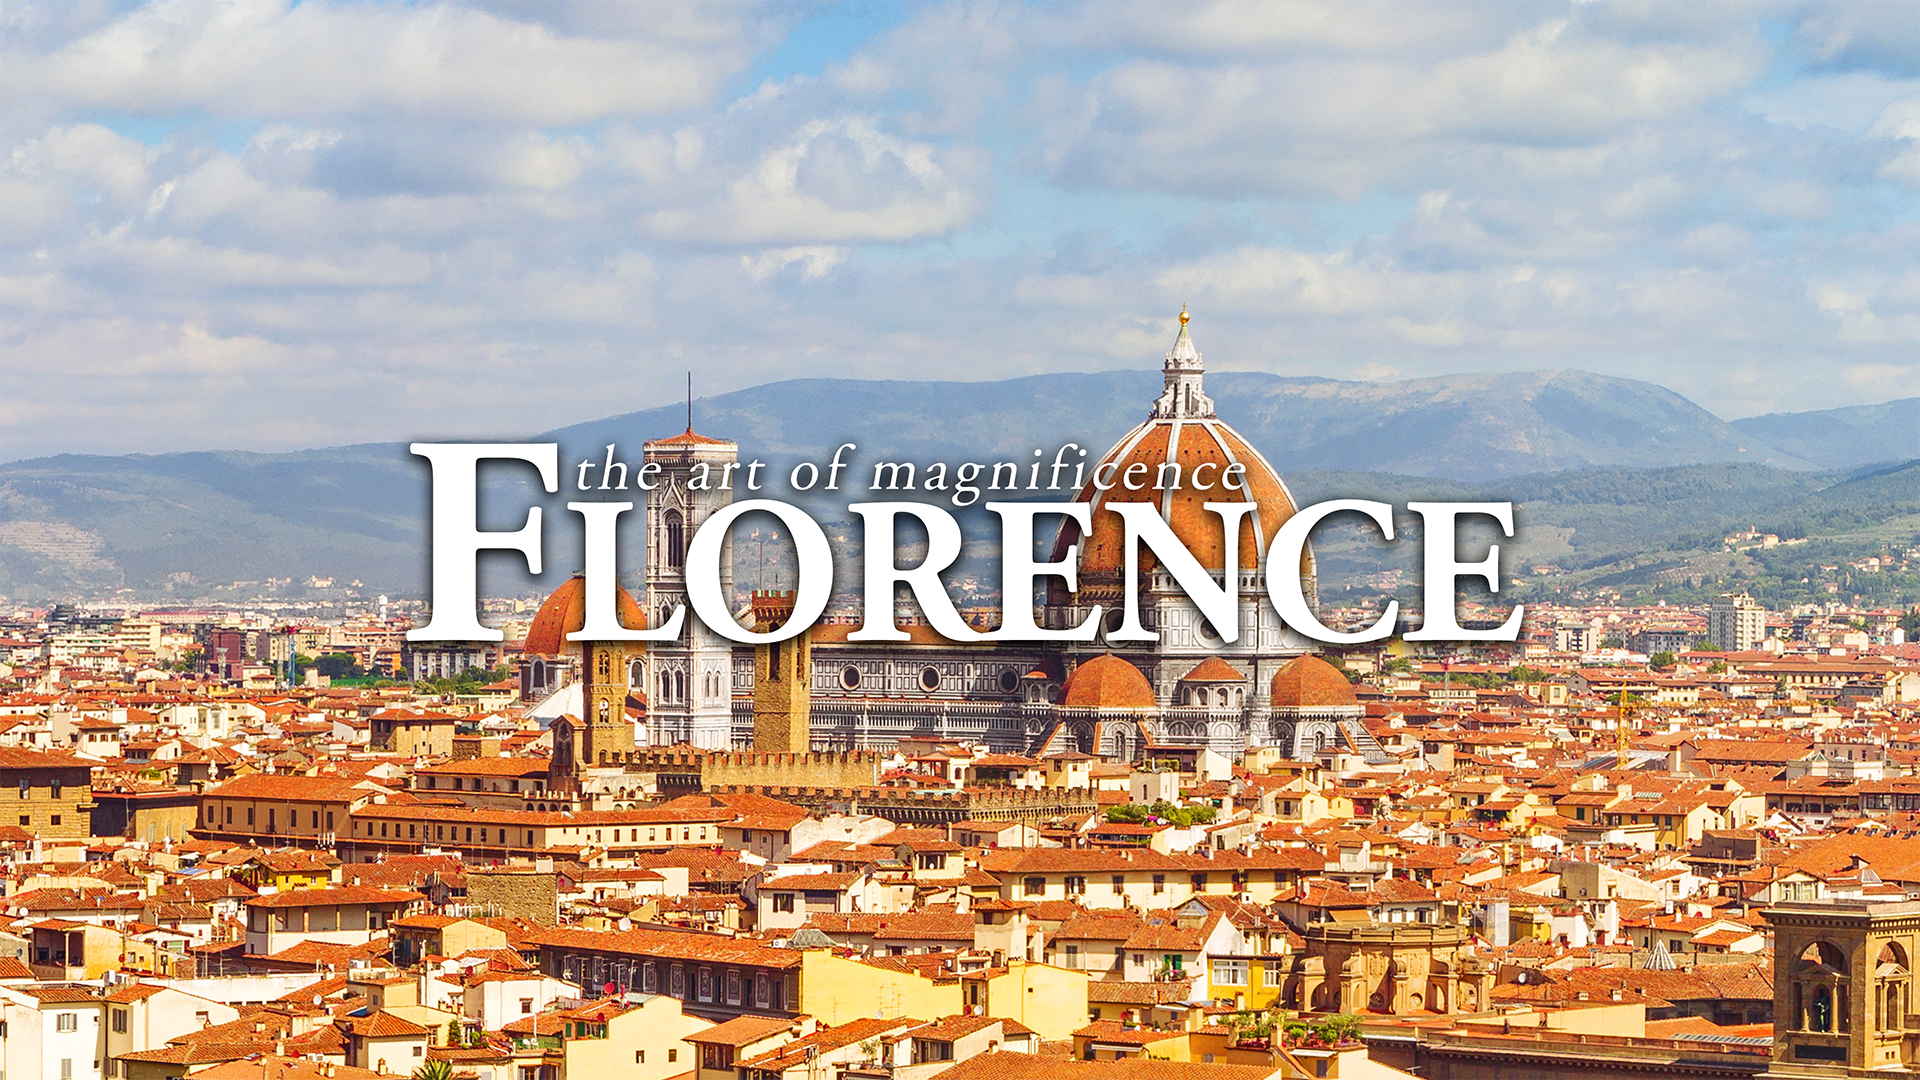 Florence: The Art of Magnificence